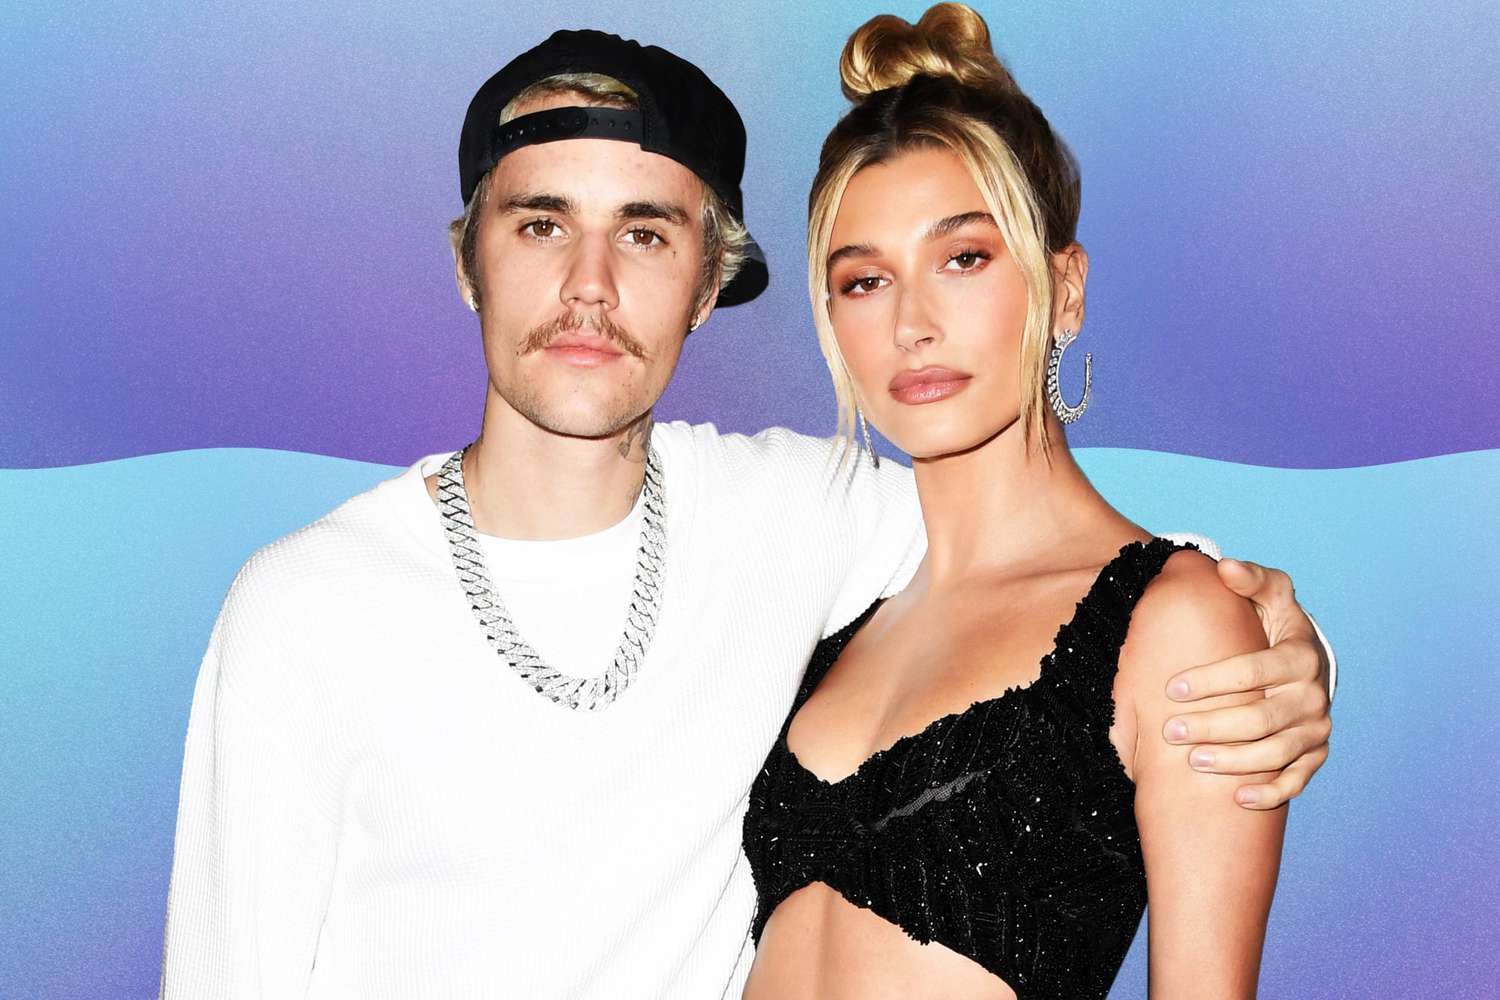 Hailey Bieber's Rise: From Hollywood Royalty to Fashion Icon and Soon-to-be Mom